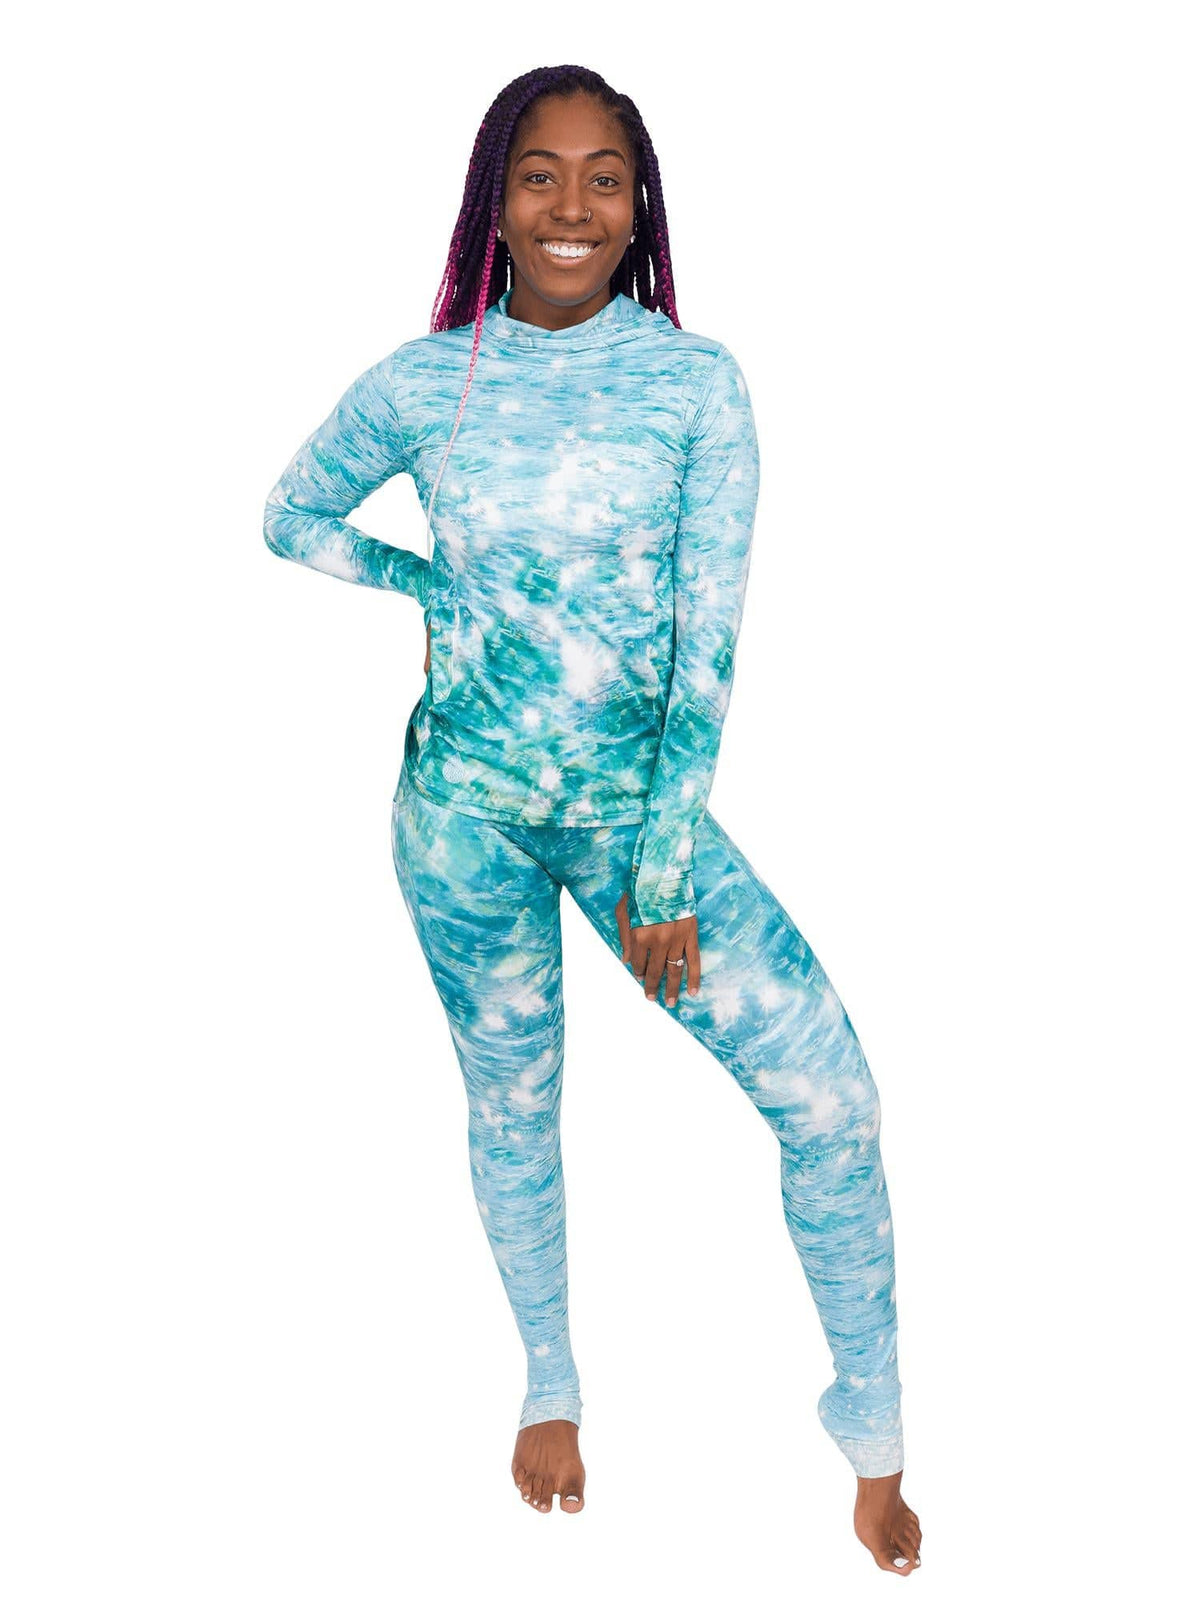 Model: Carlee is a shark &amp; sea turtle scientist and co-founder of Minorities in Shark Sciences. She is 5’7”, 145 lbs, 36C and is wearing a S sun shirt and M legging.